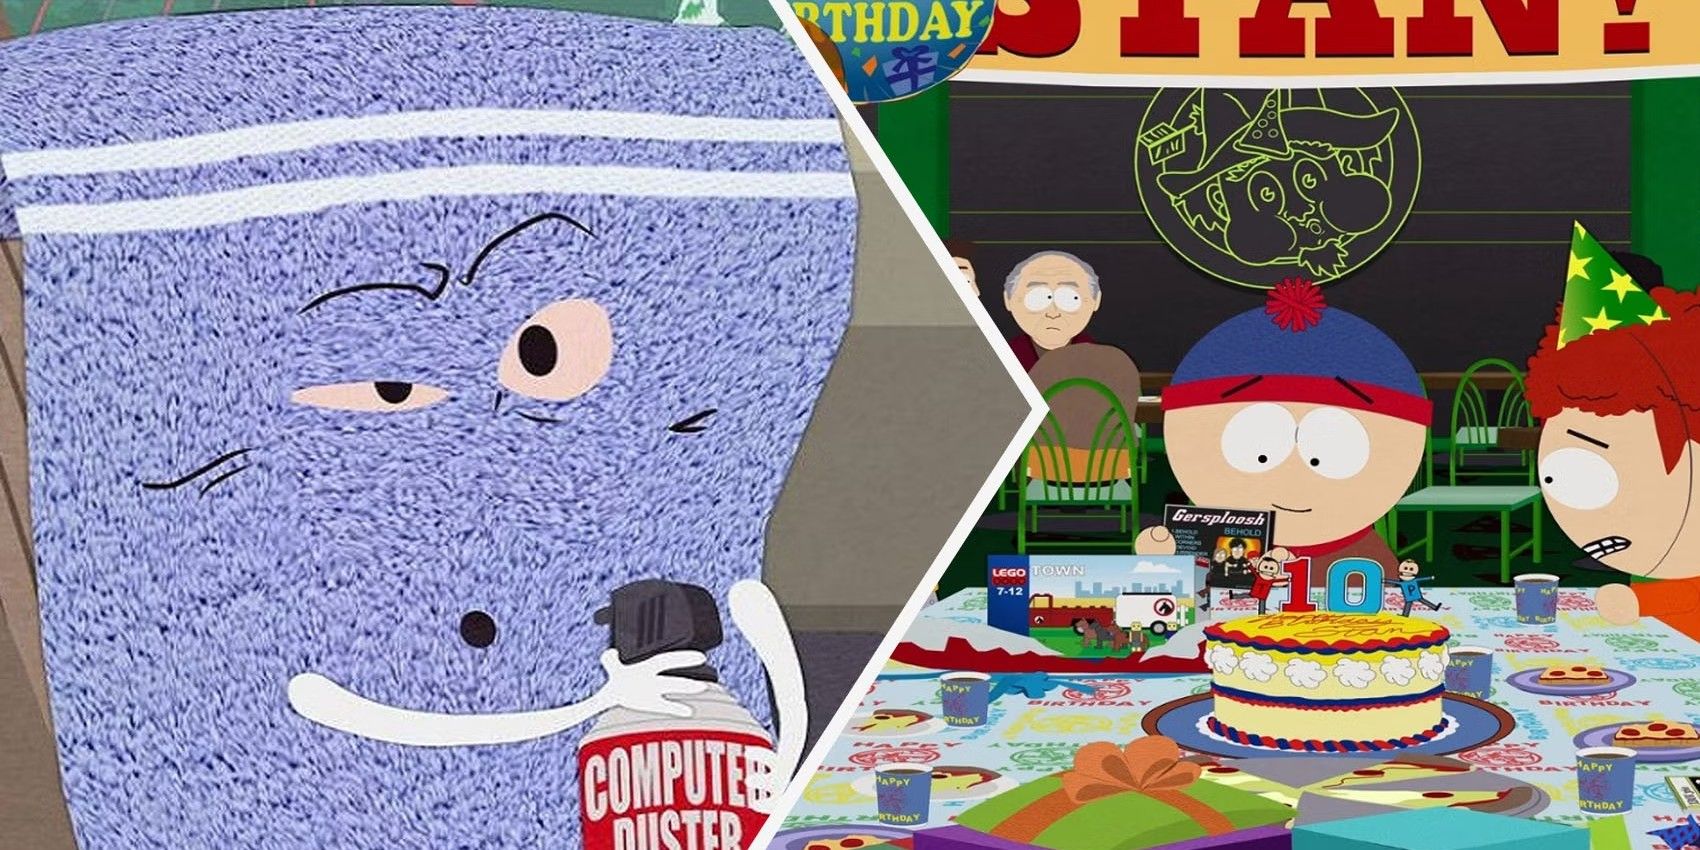 South Park returns with plenty to work with but little to say